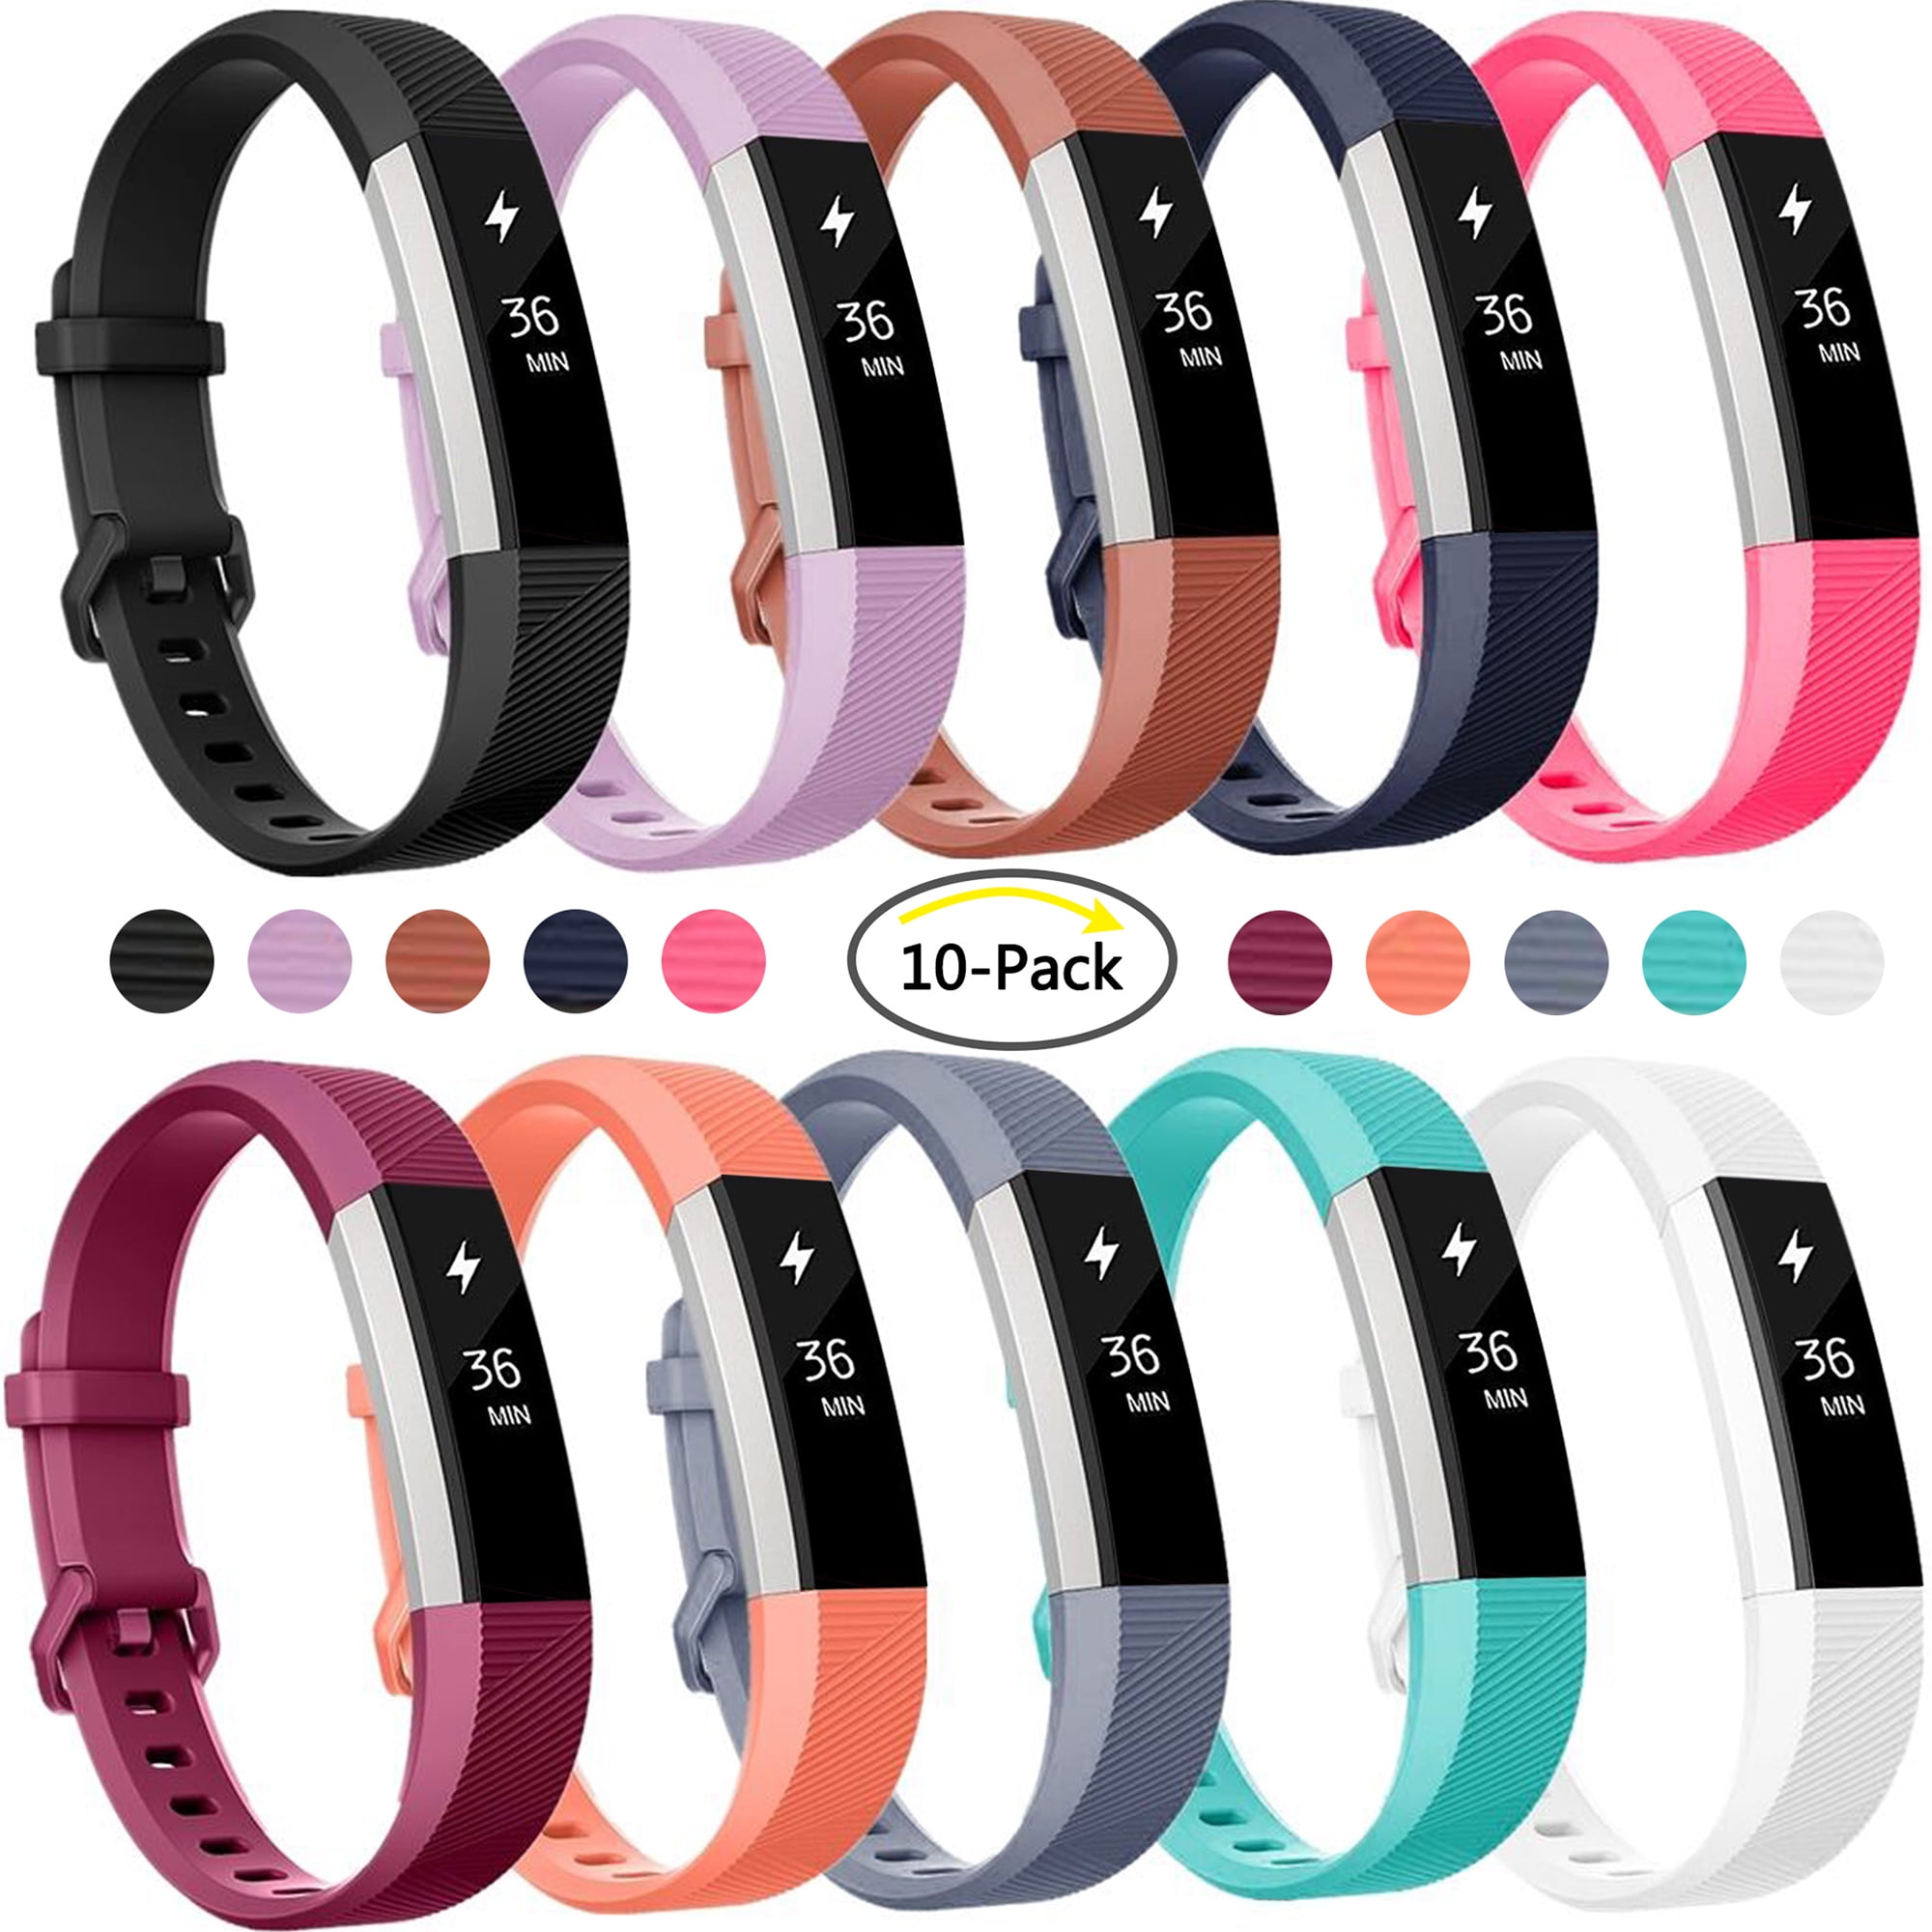 SKYLET Compatible with Fitbit Ace/Fitbit Alta/HR Bands 2 Pack Soft Breathable Silicone Replacement Wristbands with Secure Metal Clasp Men Women Kids Small Large